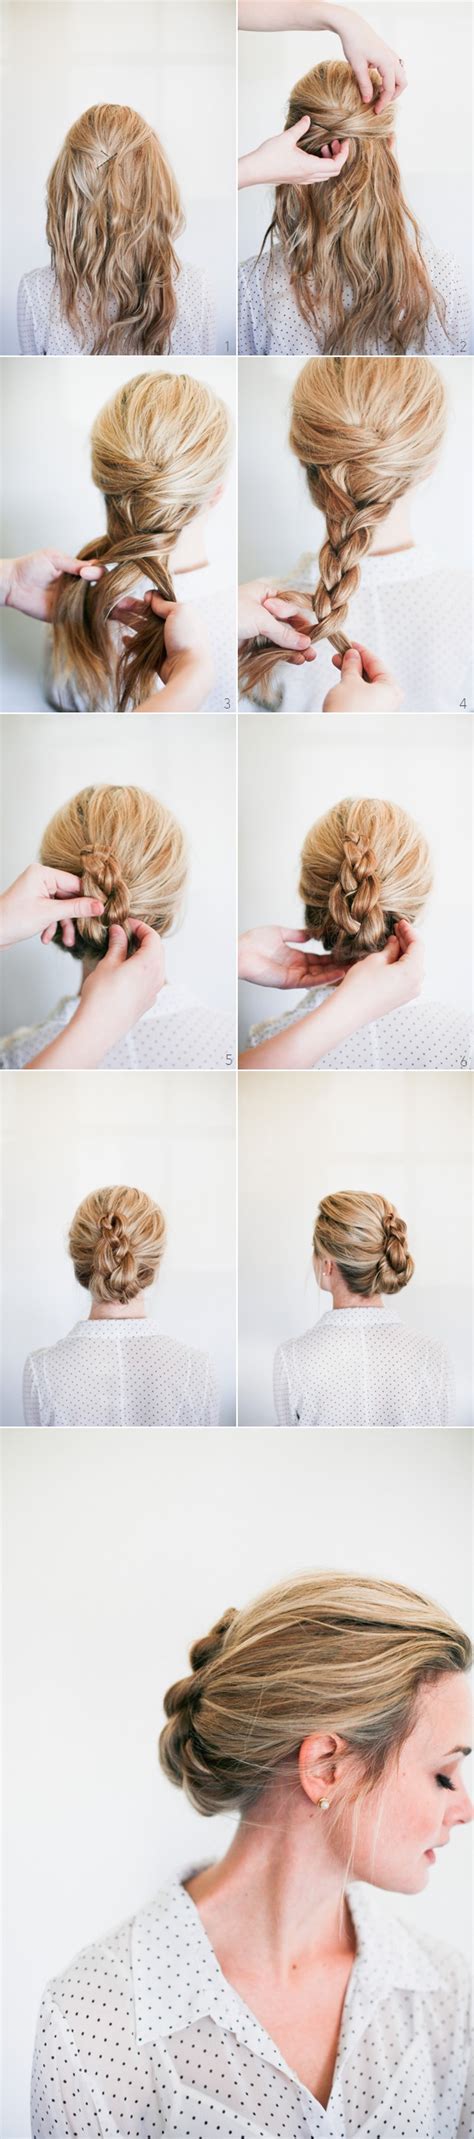 wedding hairstyle tutorial romantic braided french twist hairstyles weekly